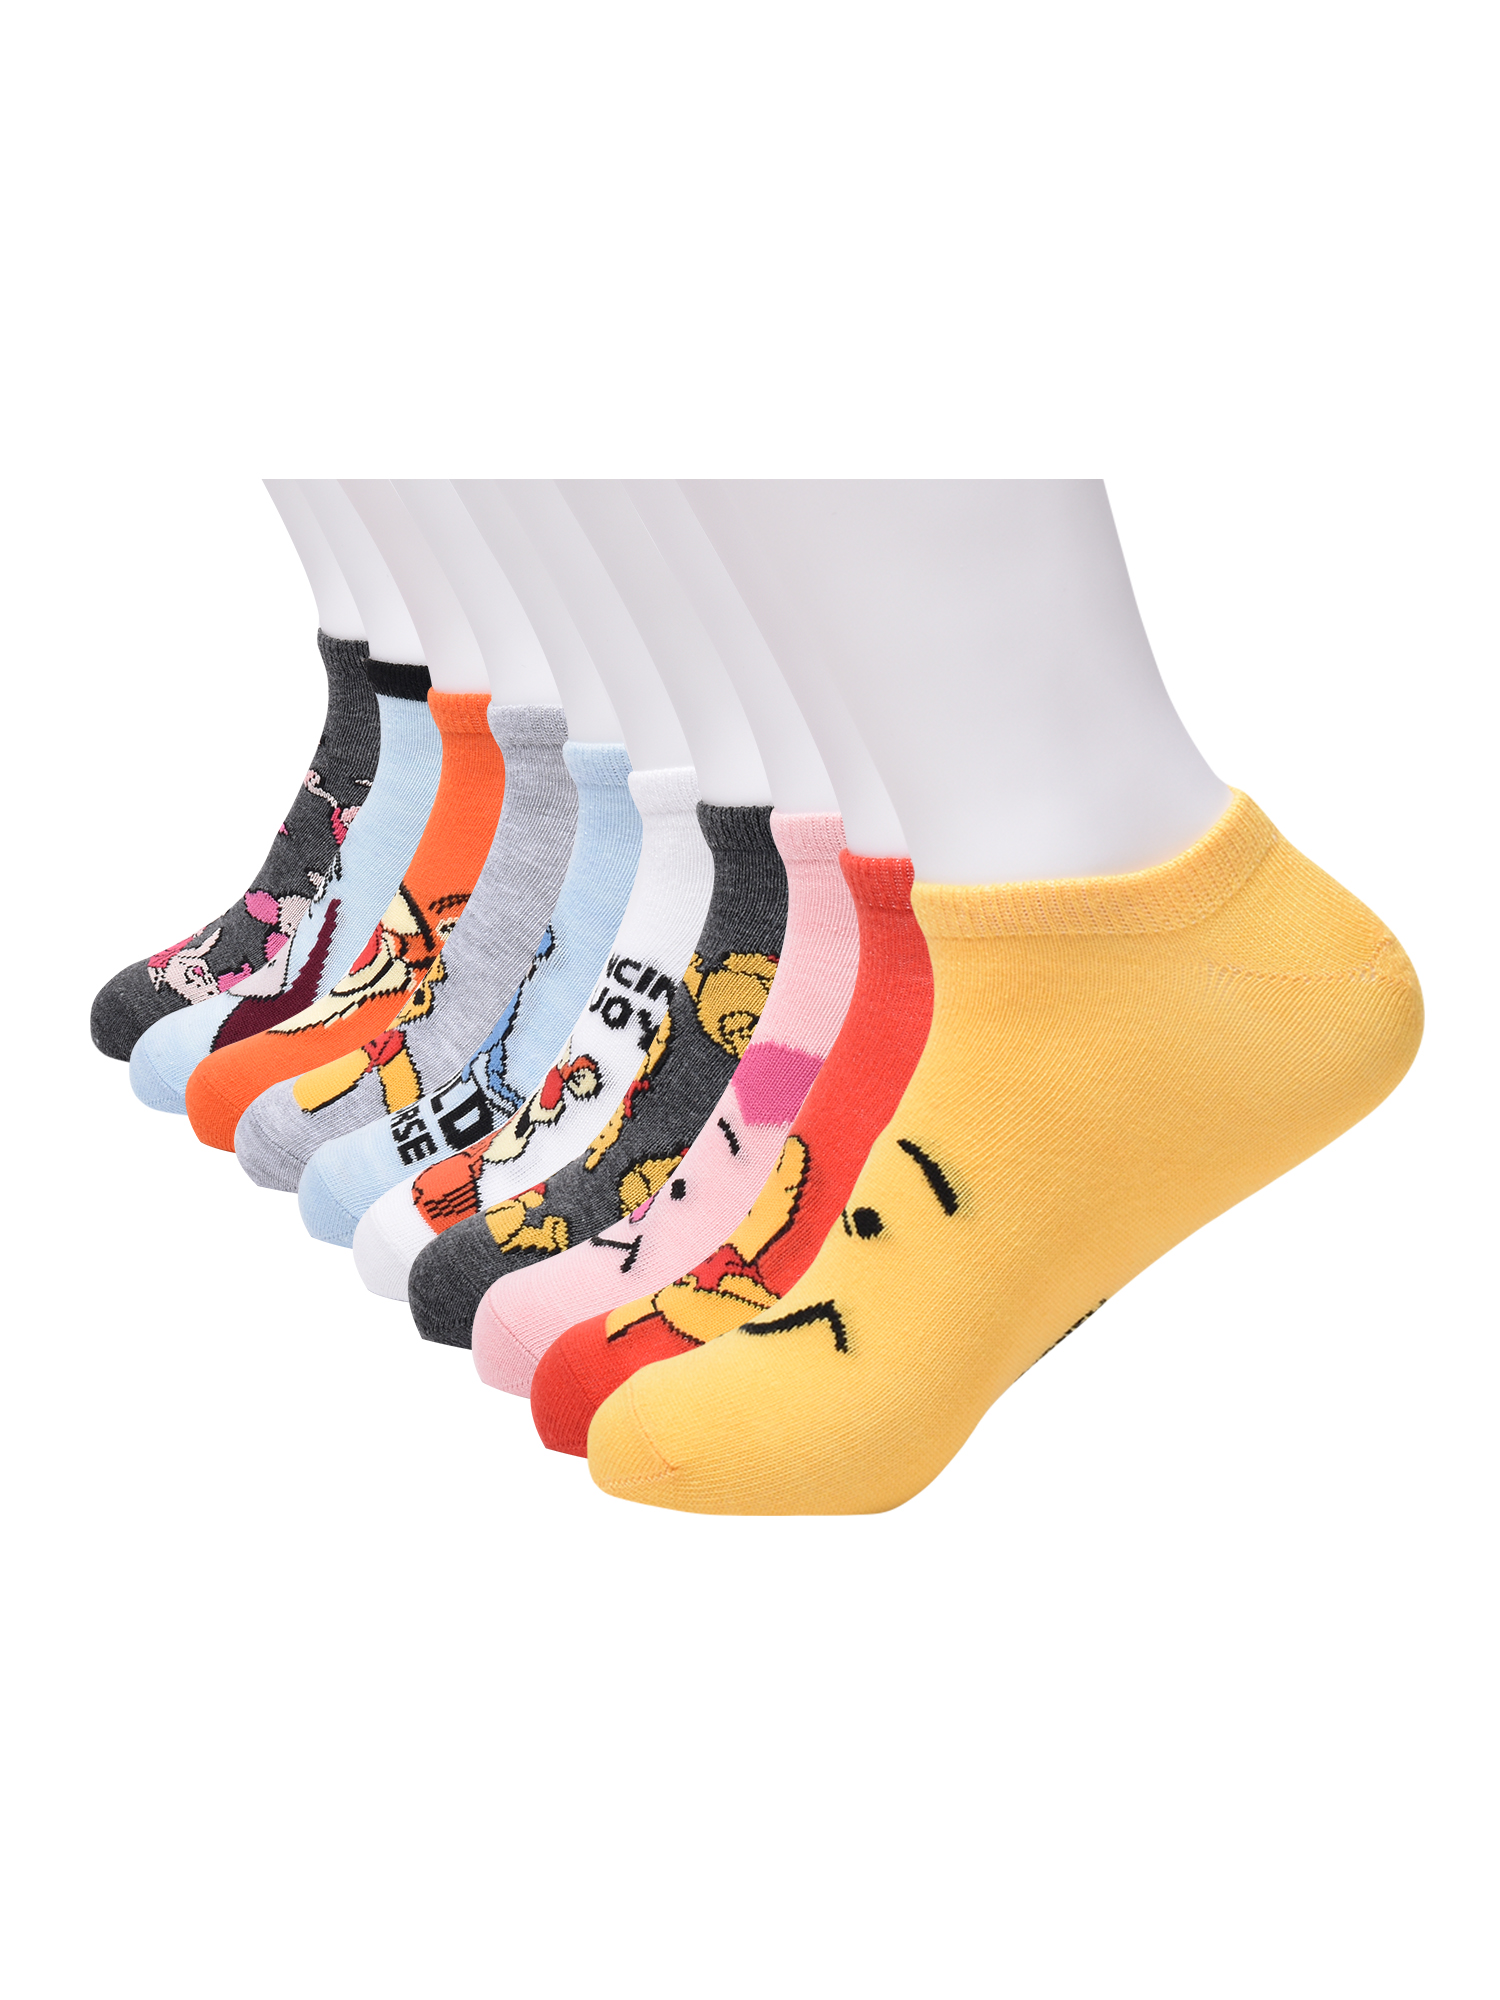 Disney Womens Winnie the Pooh Graphic Super No Show Socks, 10-Pack, Sizes 4-10 - image 3 of 5